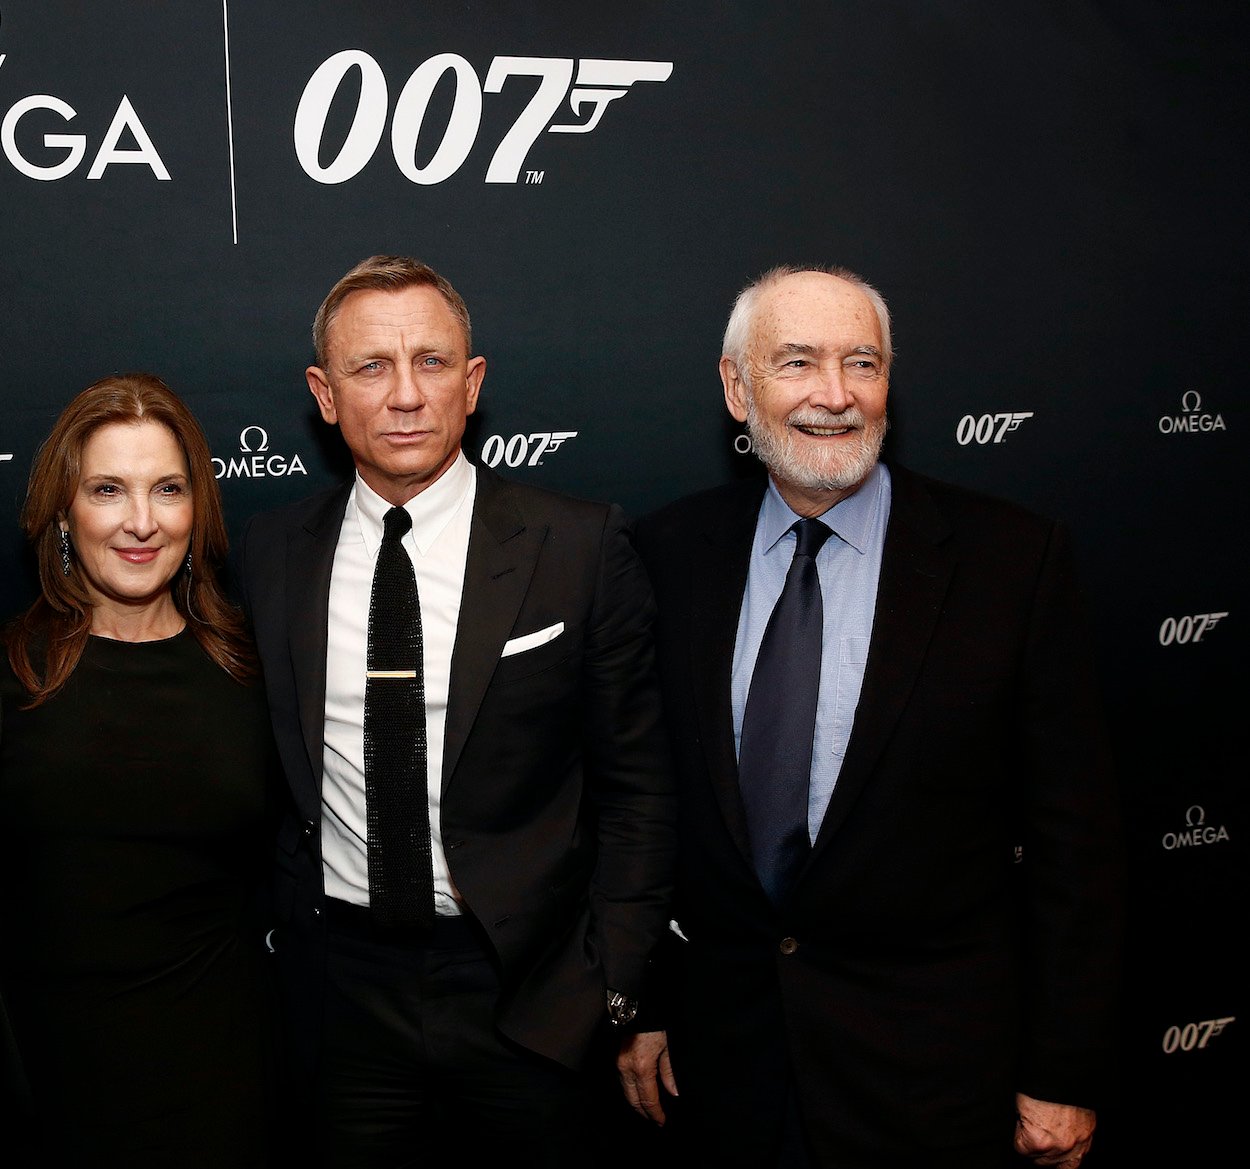 Barbara Broccoli (from left), Daniel Craig, and Michael G. Wilson attend an Omega watch unveiling in 2019. With Craig leaving the role, the hunt for the next James Bond includes specific requirements that rule out Idris Elba and Tom Hardy.